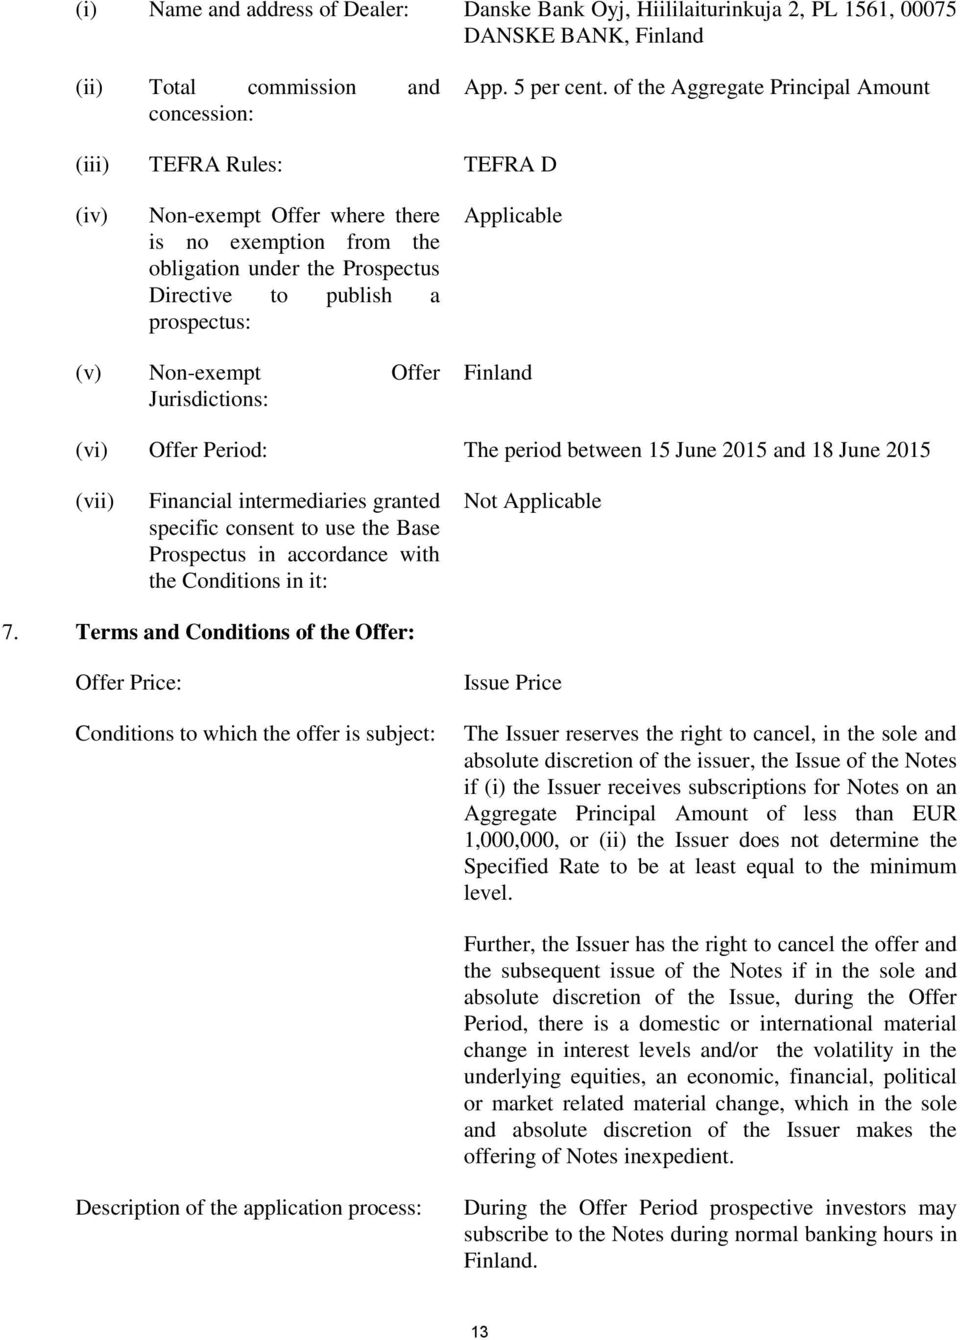 (v) Non-exempt Offer Jurisdictions: Finland (vi) Offer Period: The period between 15 June 2015 and 18 June 2015 (vii) Financial intermediaries granted specific consent to use the Base Prospectus in